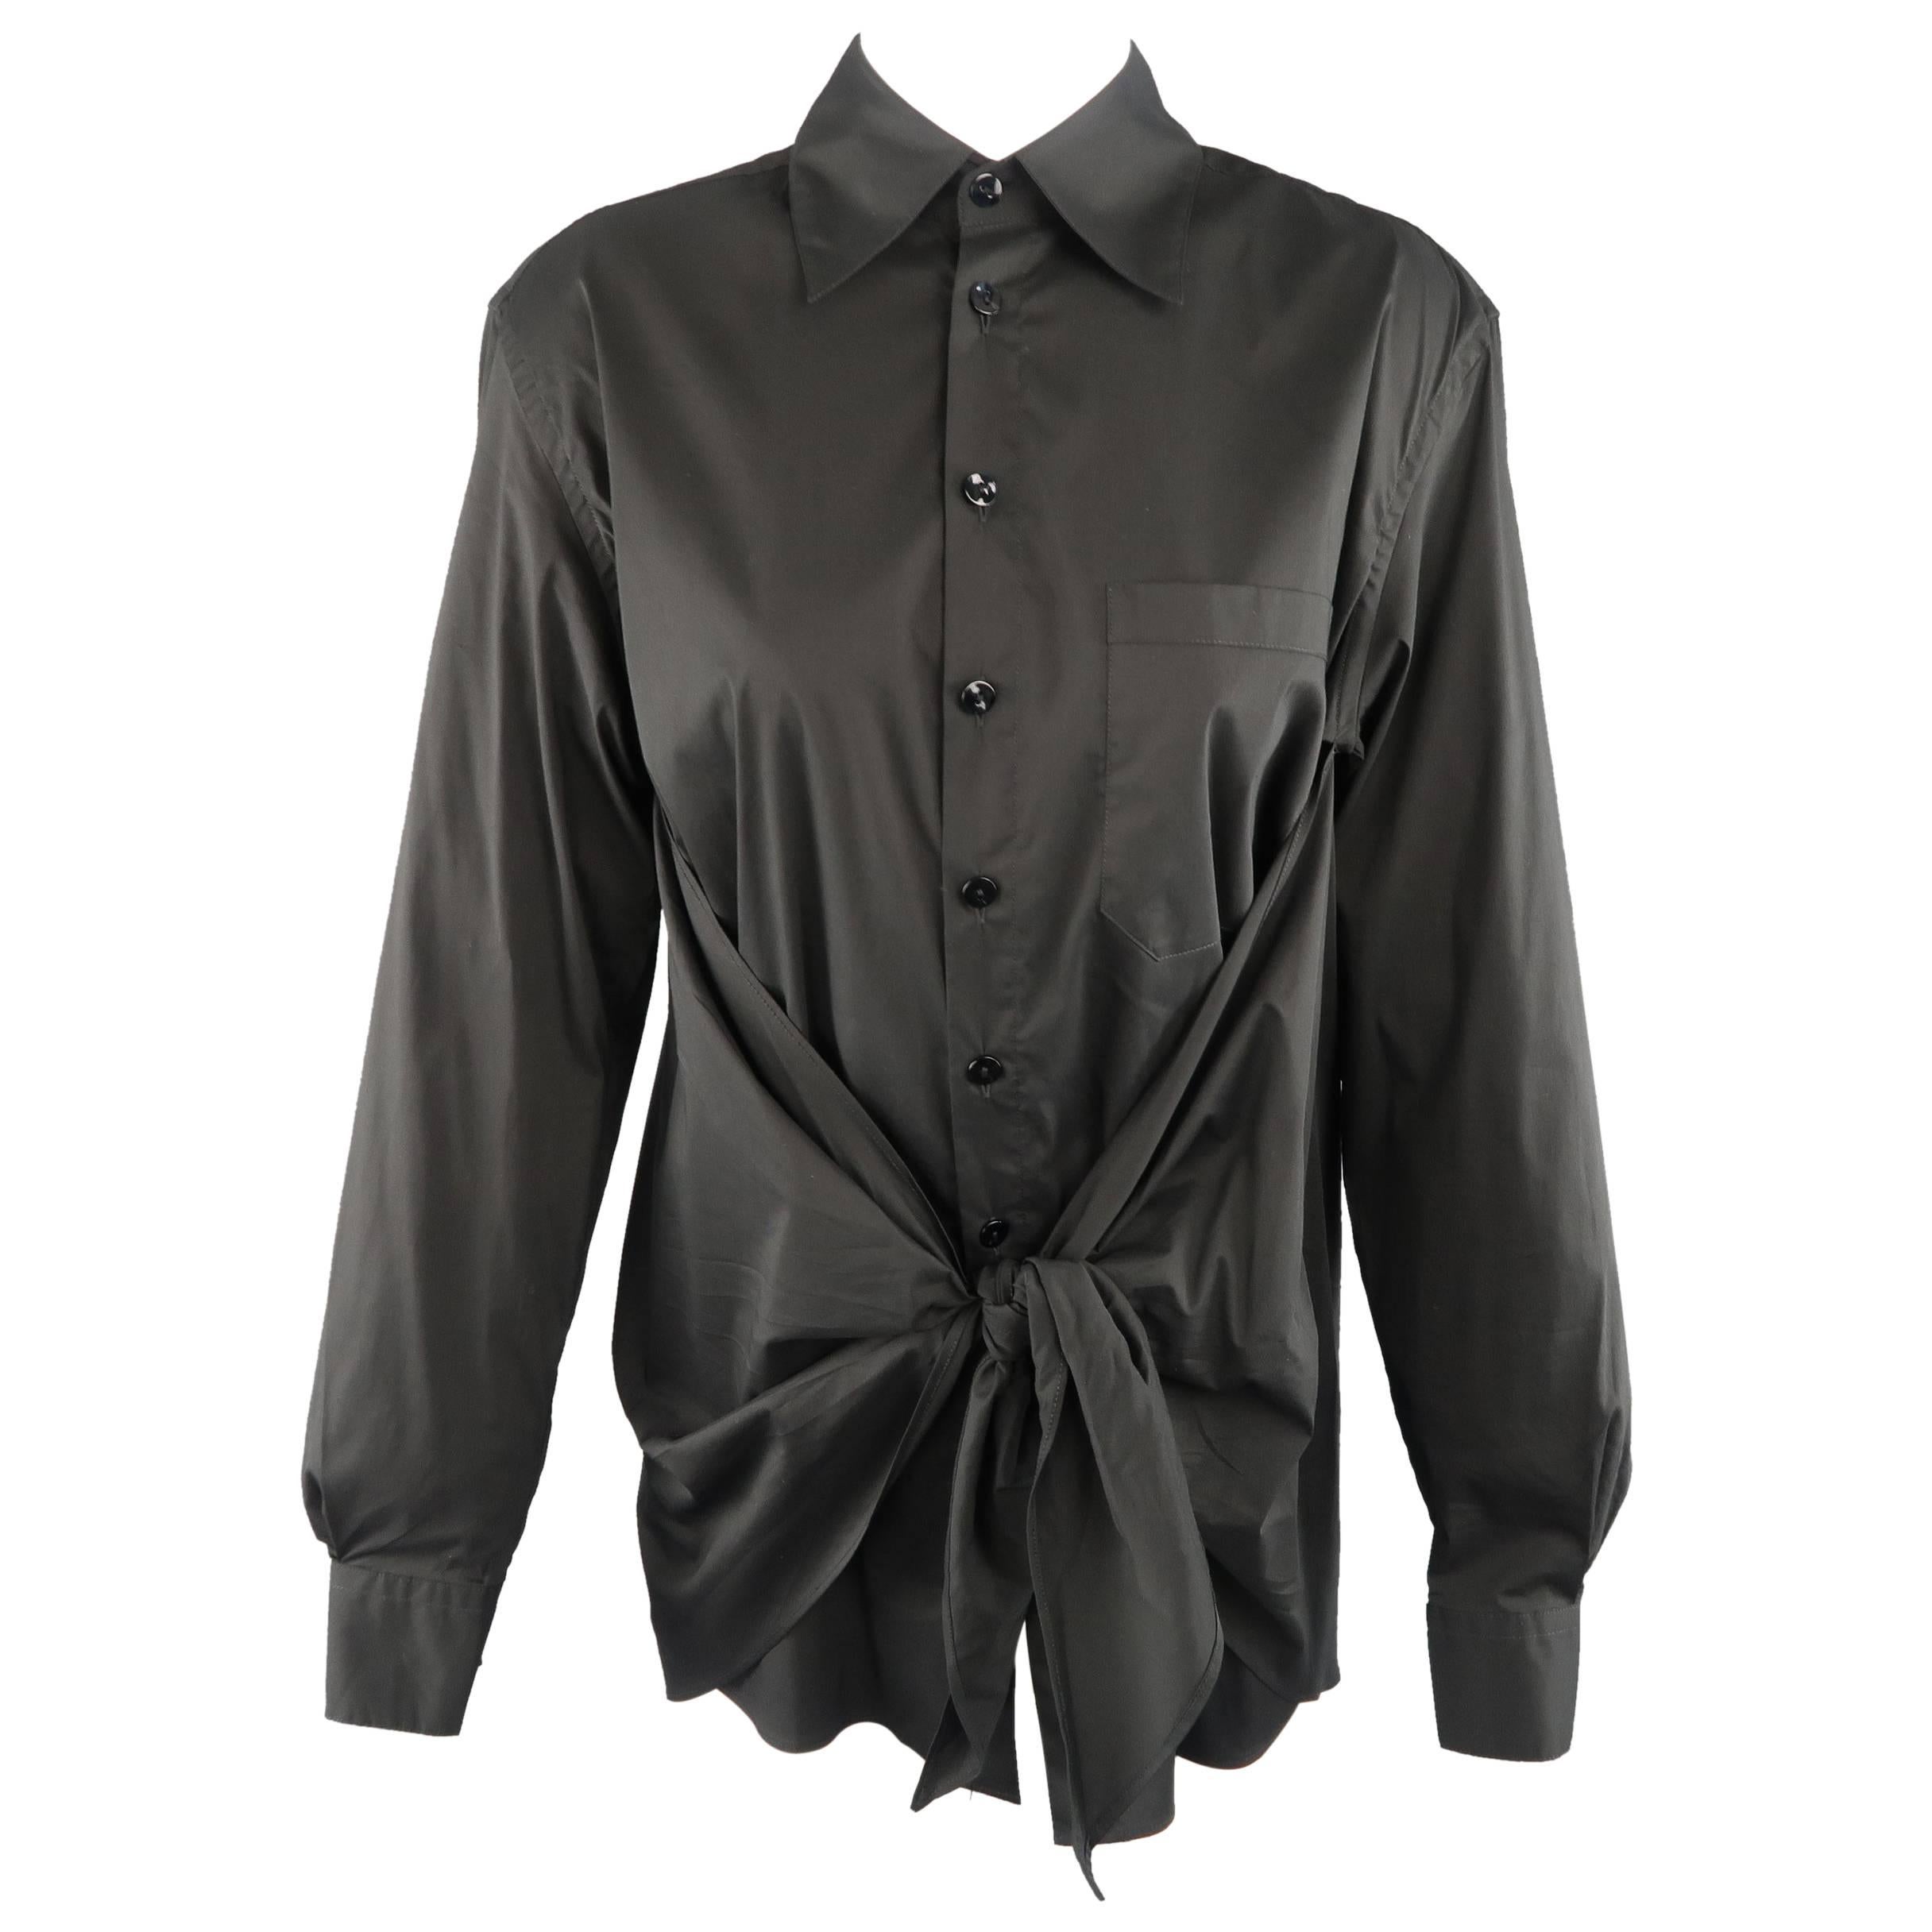 Jean Paul Gaultier Size M Black Tied Front Collared Shirt